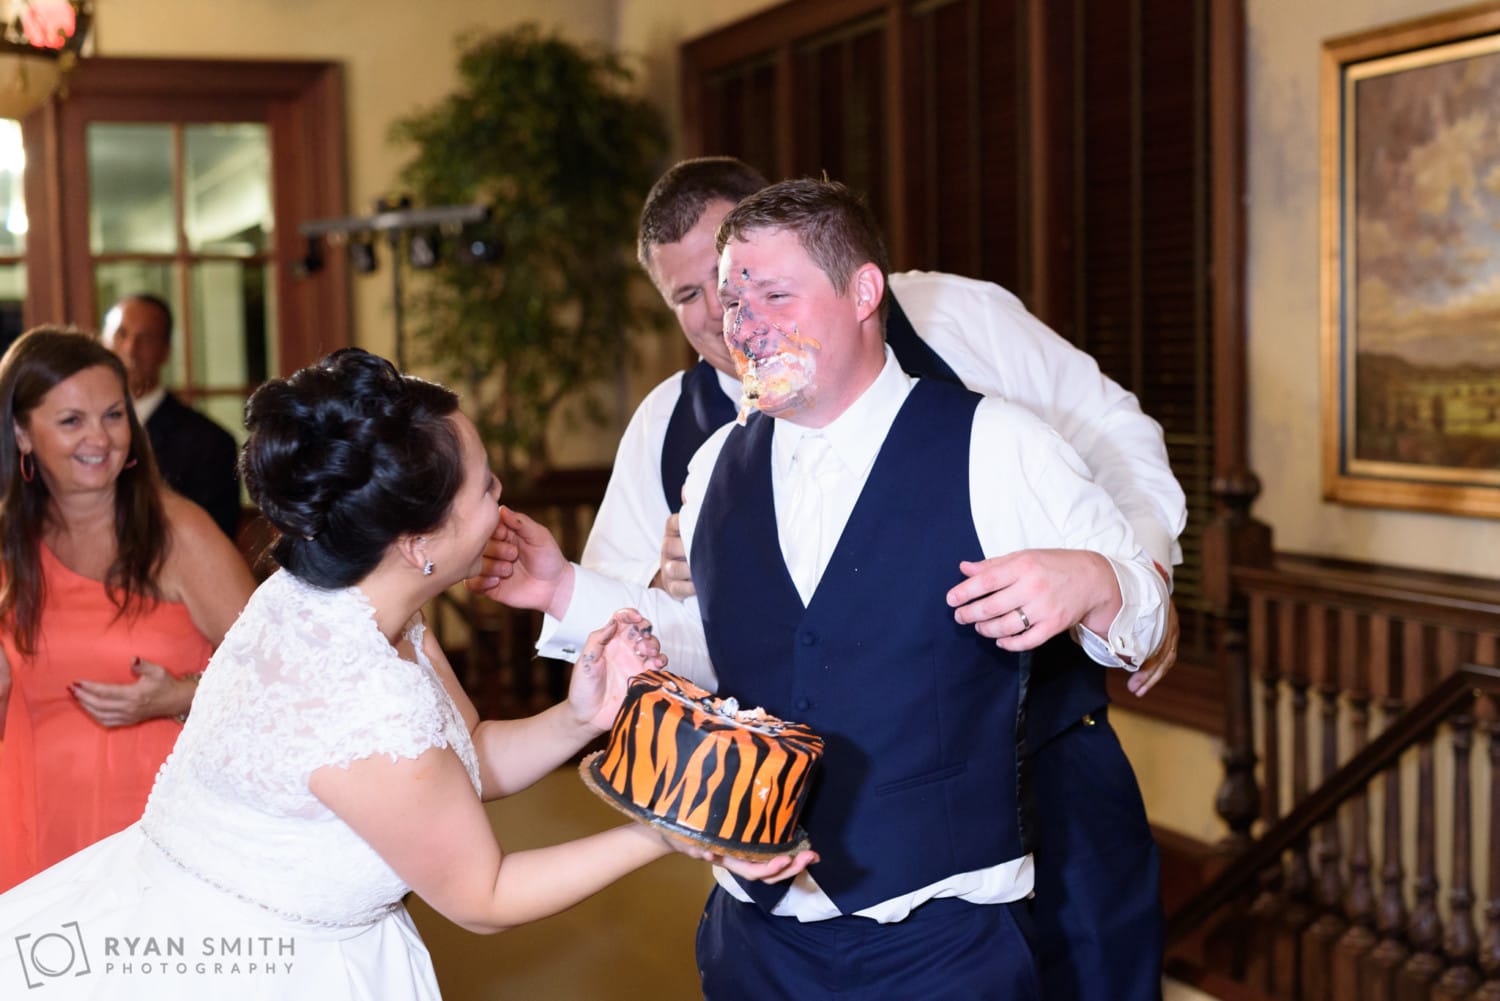 Bride and groom getting wild with the cake smash - Dye Club at Barefoot Resort